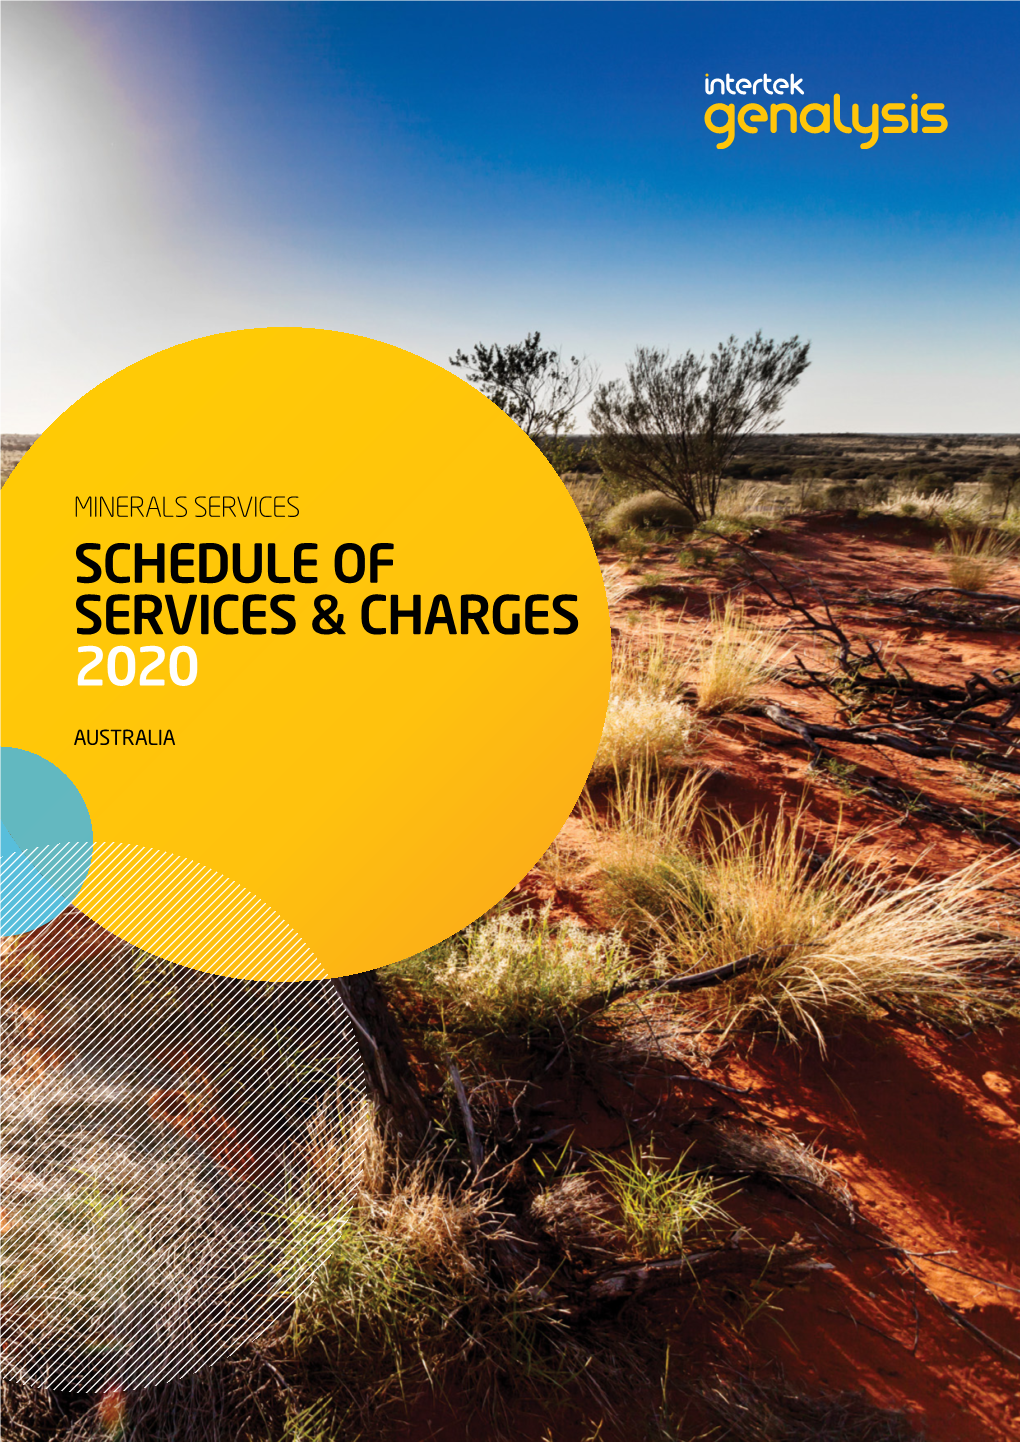 Schedule of Services & Charges 2020